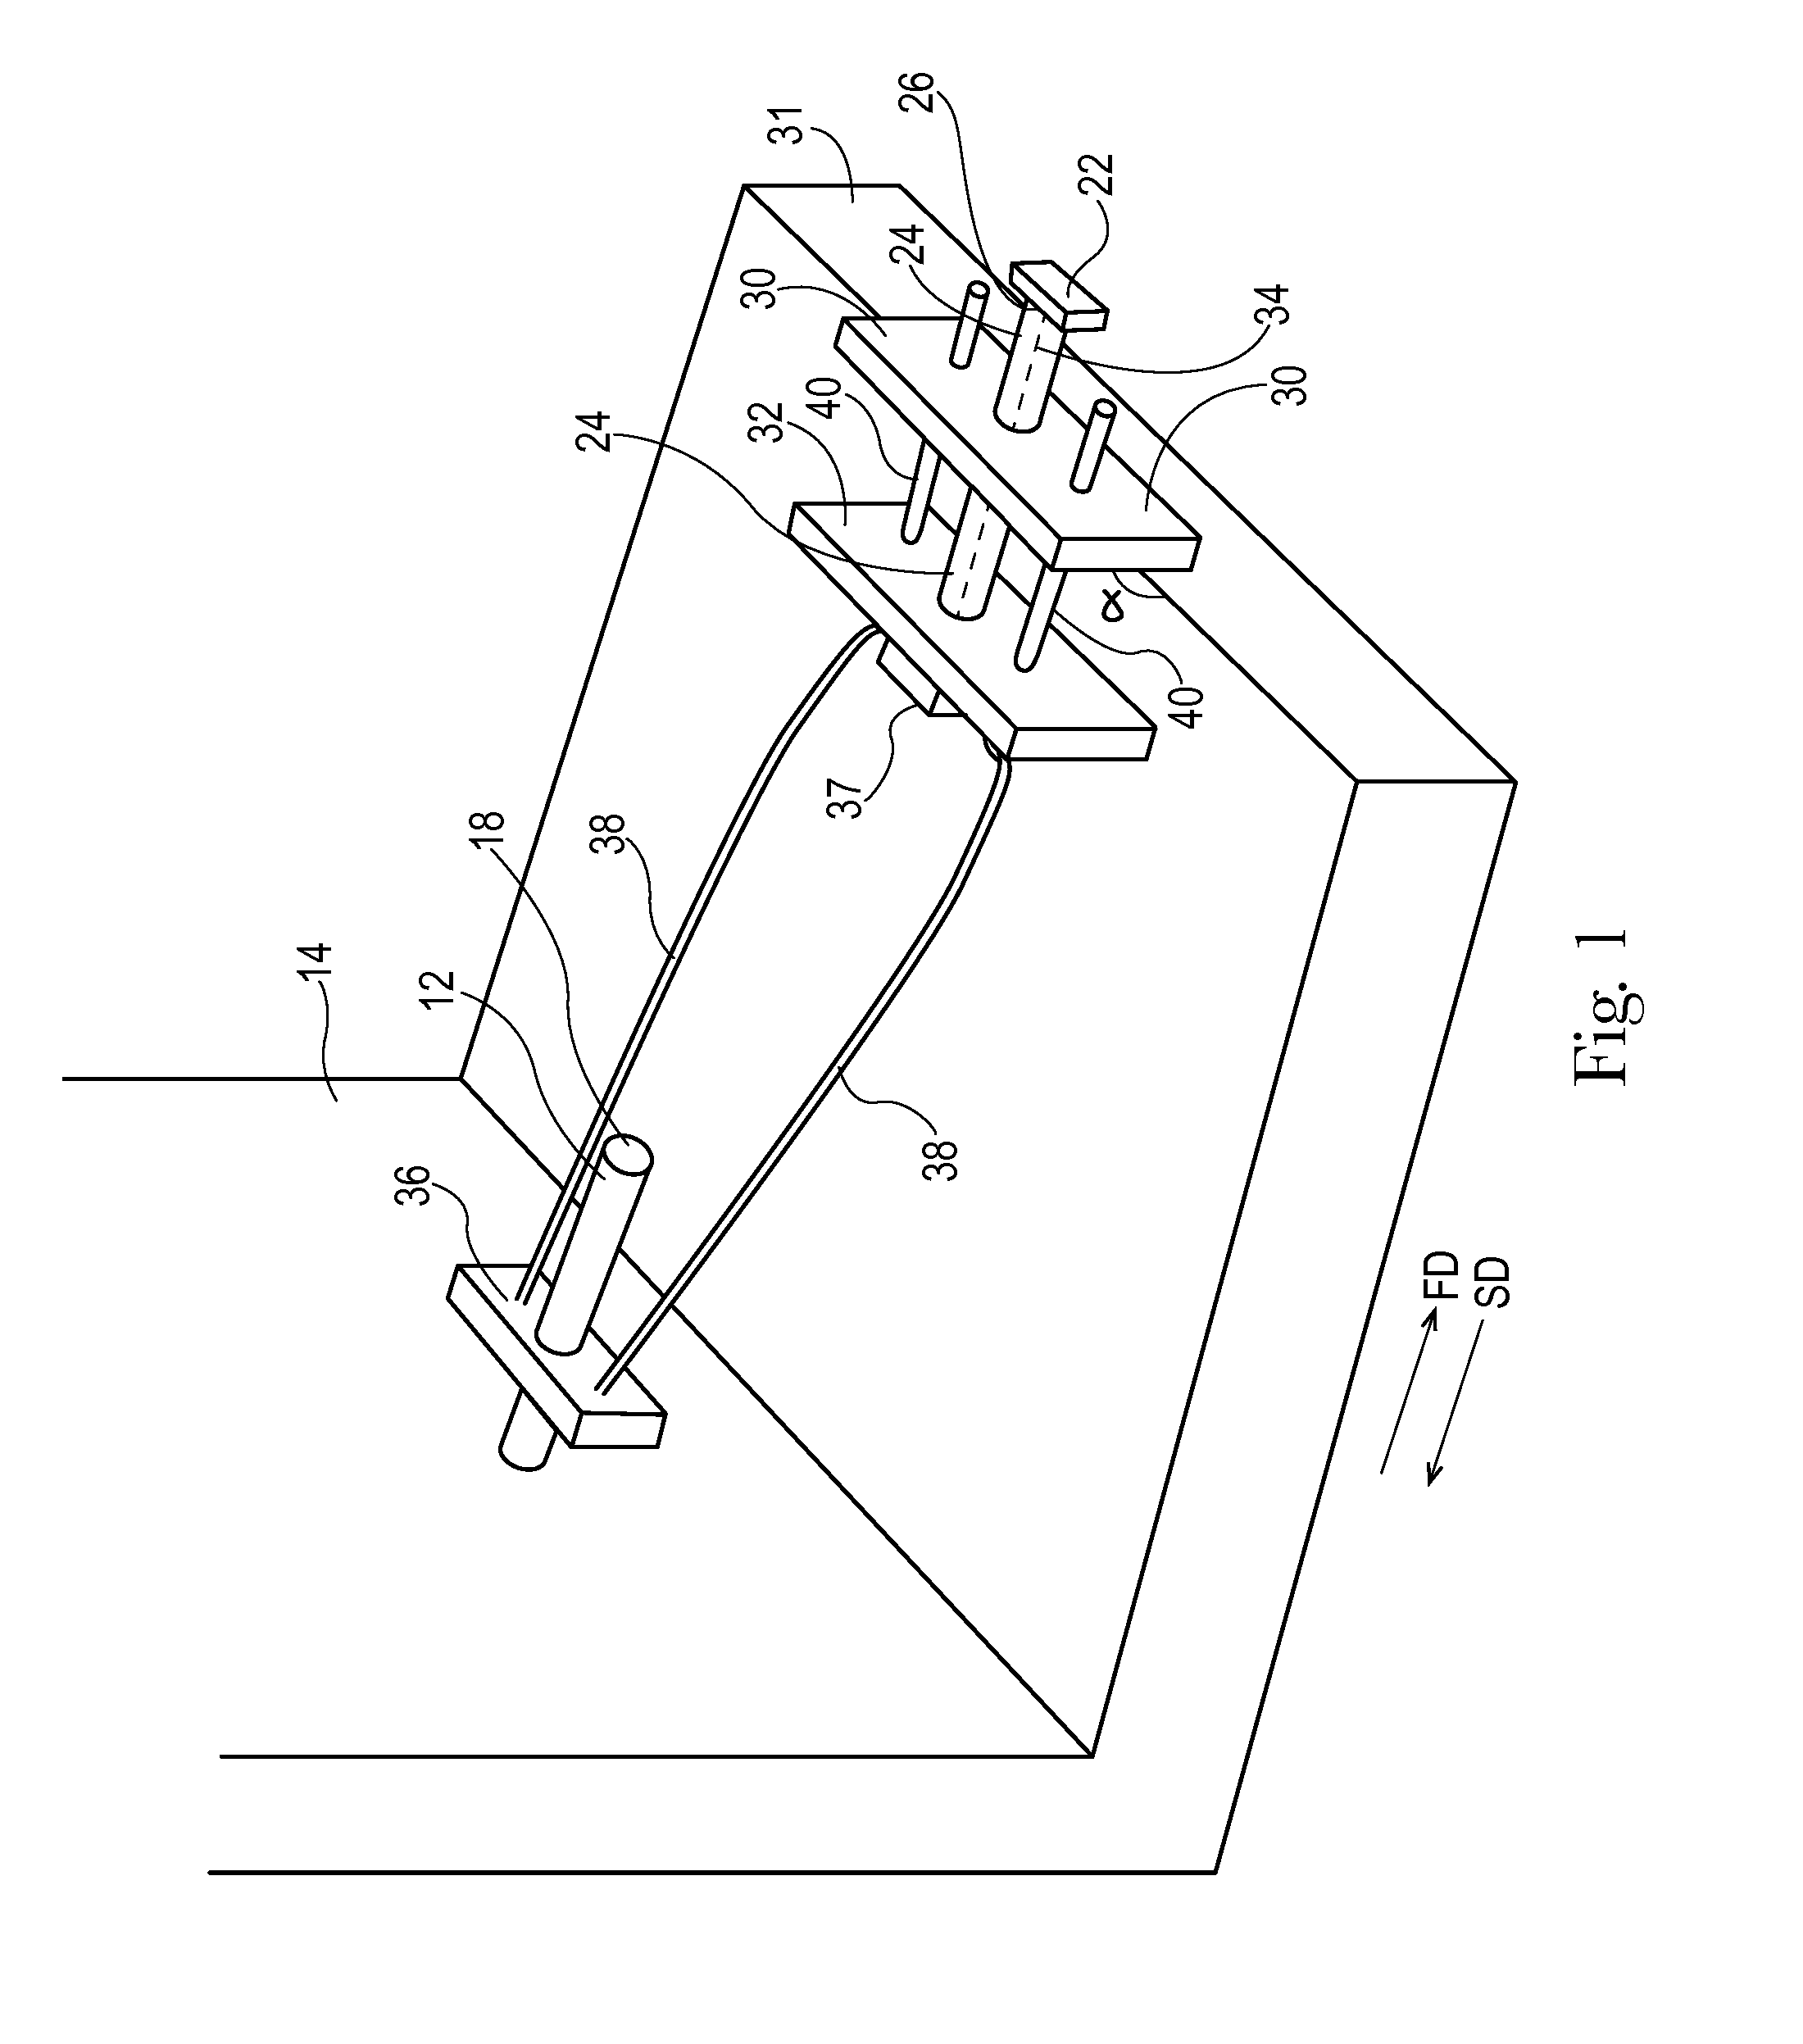 Apparatus and method for removing a shaft